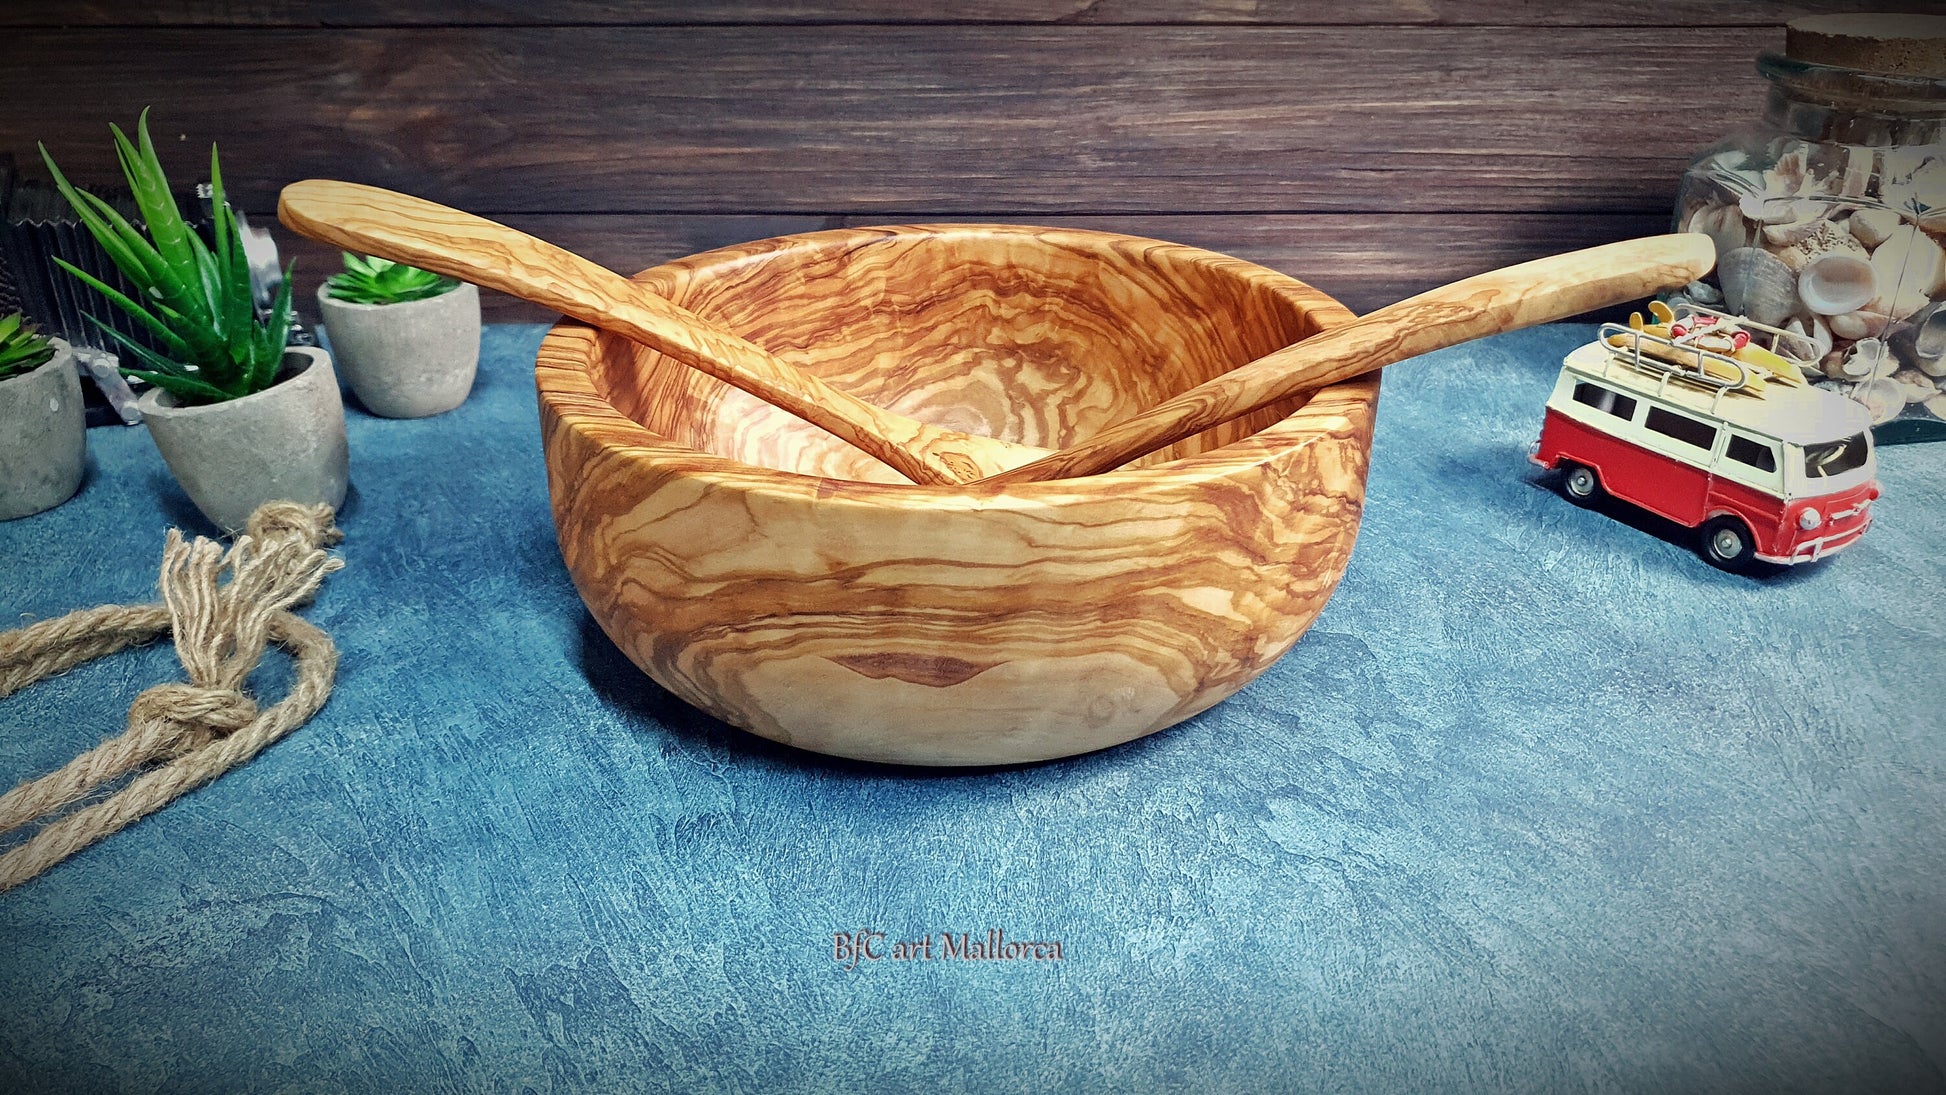 Salad Bowl with Servers spoons set Olive Wood, Wooden Bowls handmade with Serving Spoons for Salads and Pasta Serving Bowls